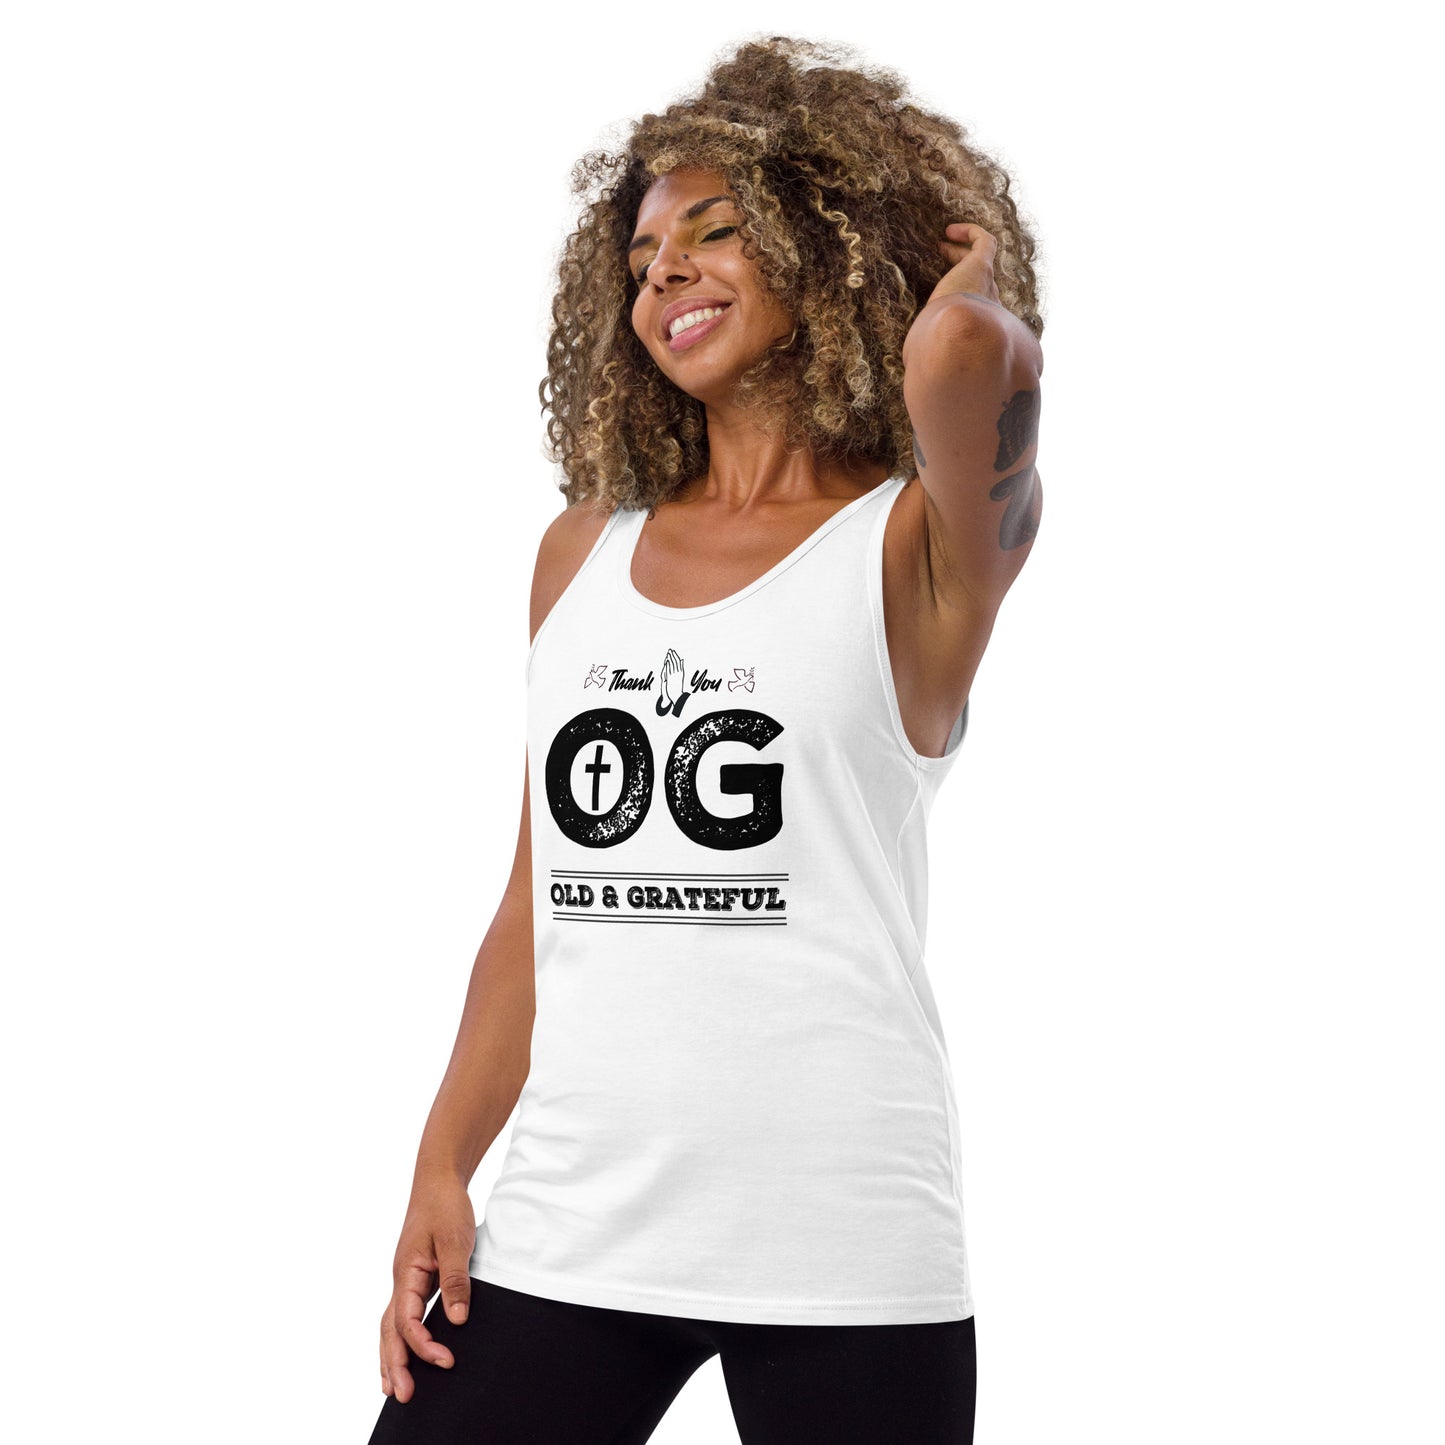 Old and Grateful Unisex Tank Top